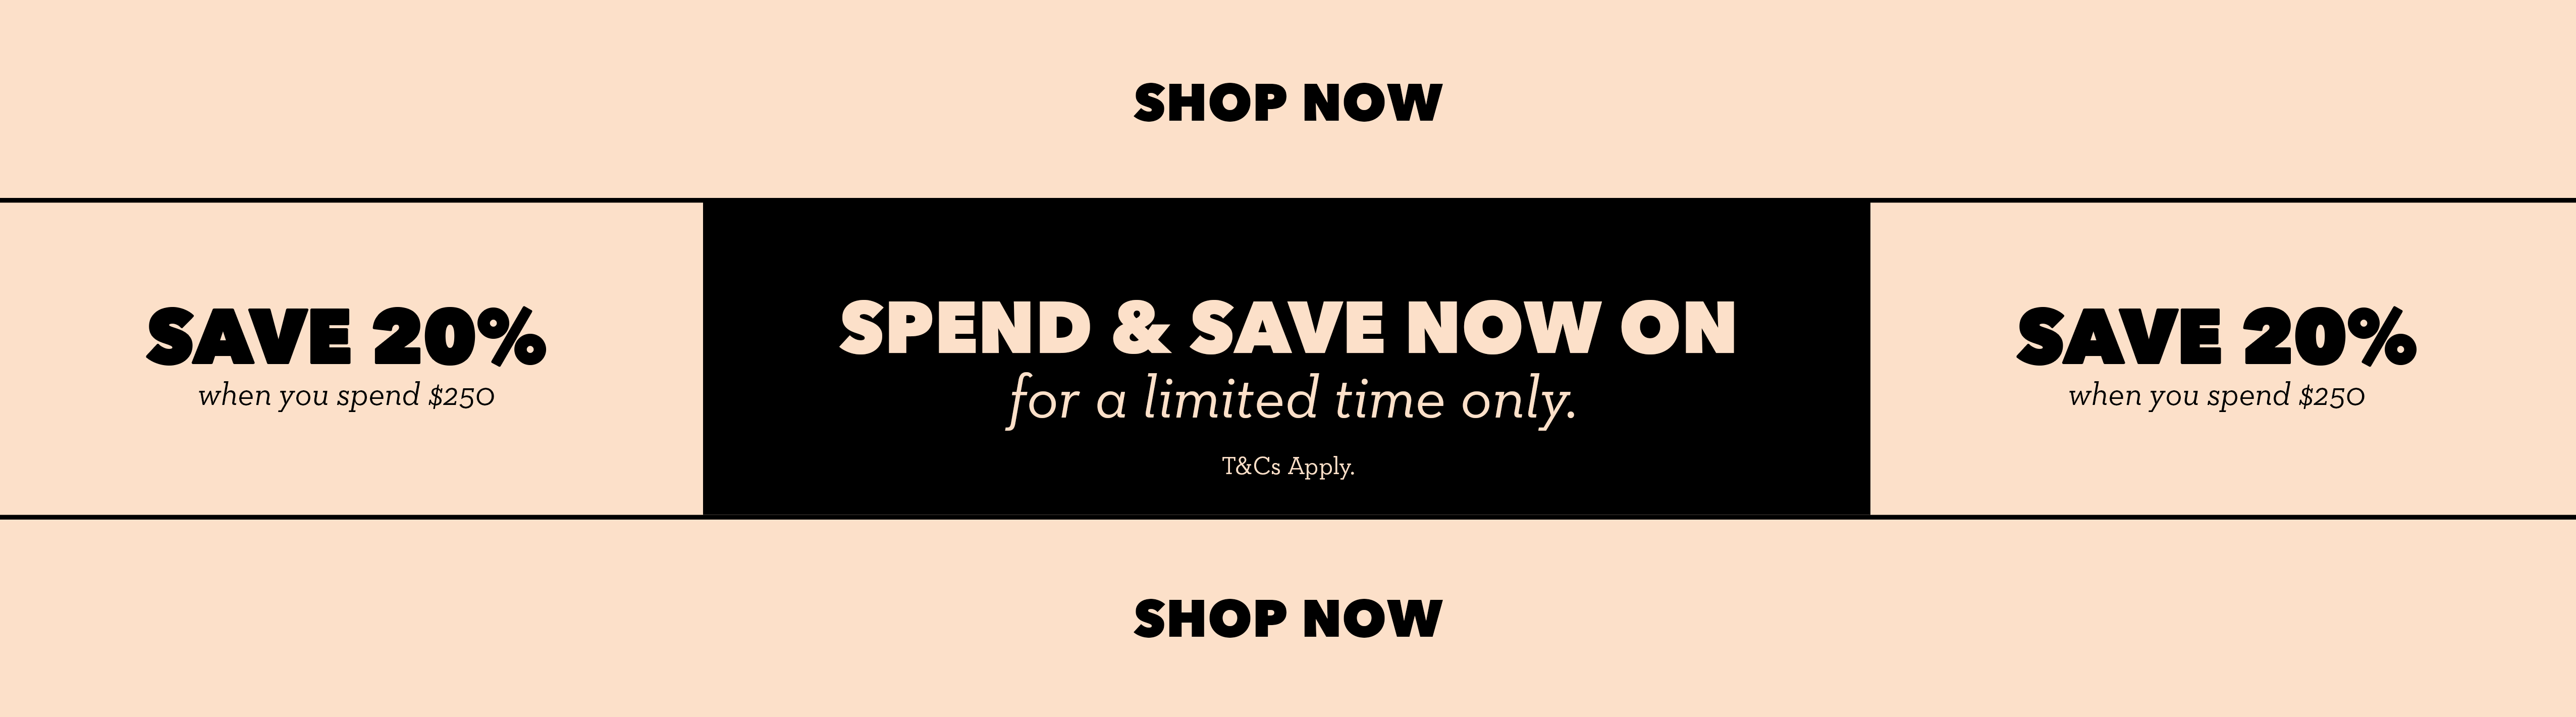 Spend & Save Now On! Save 20% when you spend $250. Shop Now.